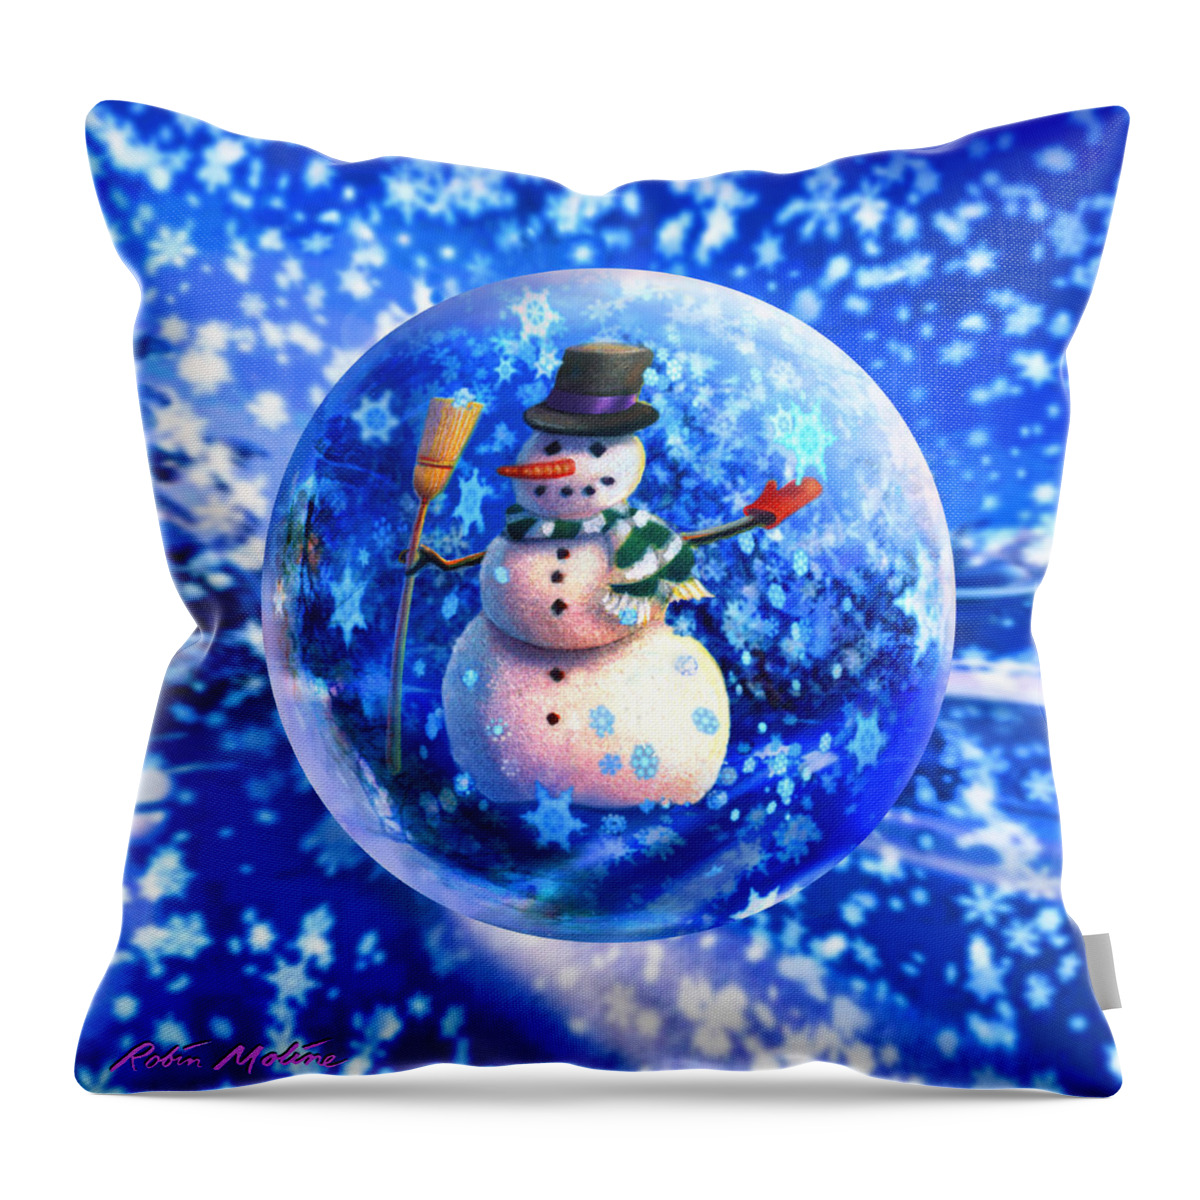 Snow Globe Throw Pillow featuring the painting Frosty the Snowglobe by Robin Moline